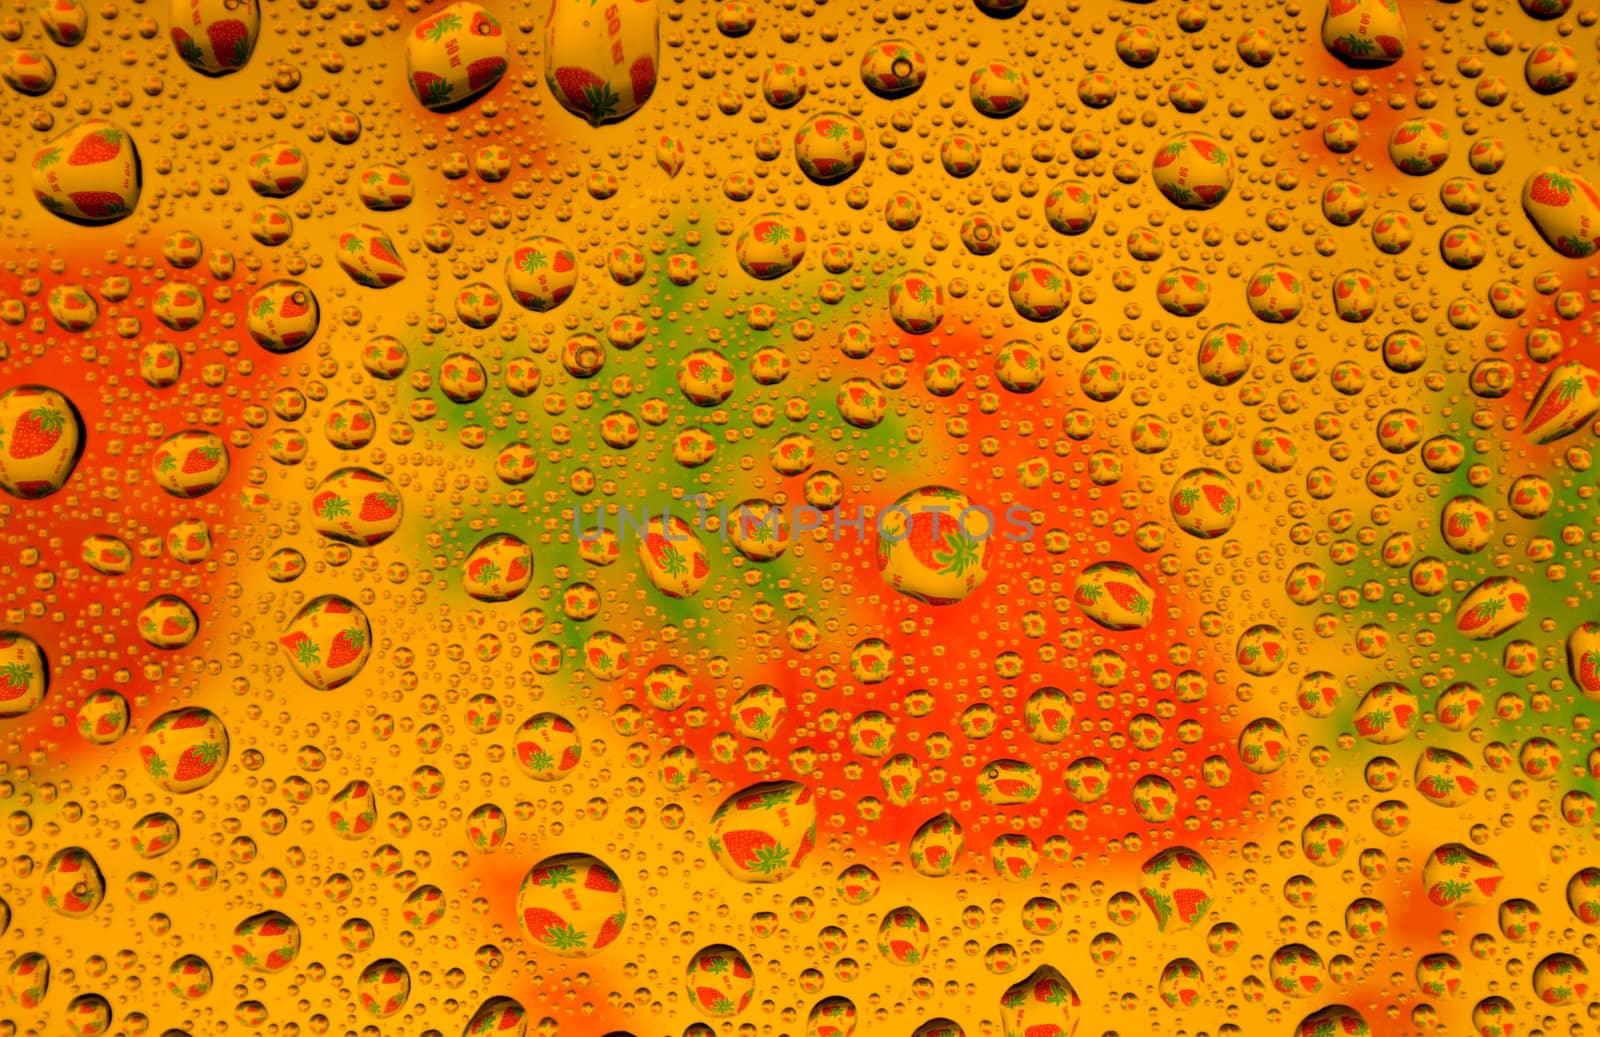 Water drops over strawberries background by arhip4